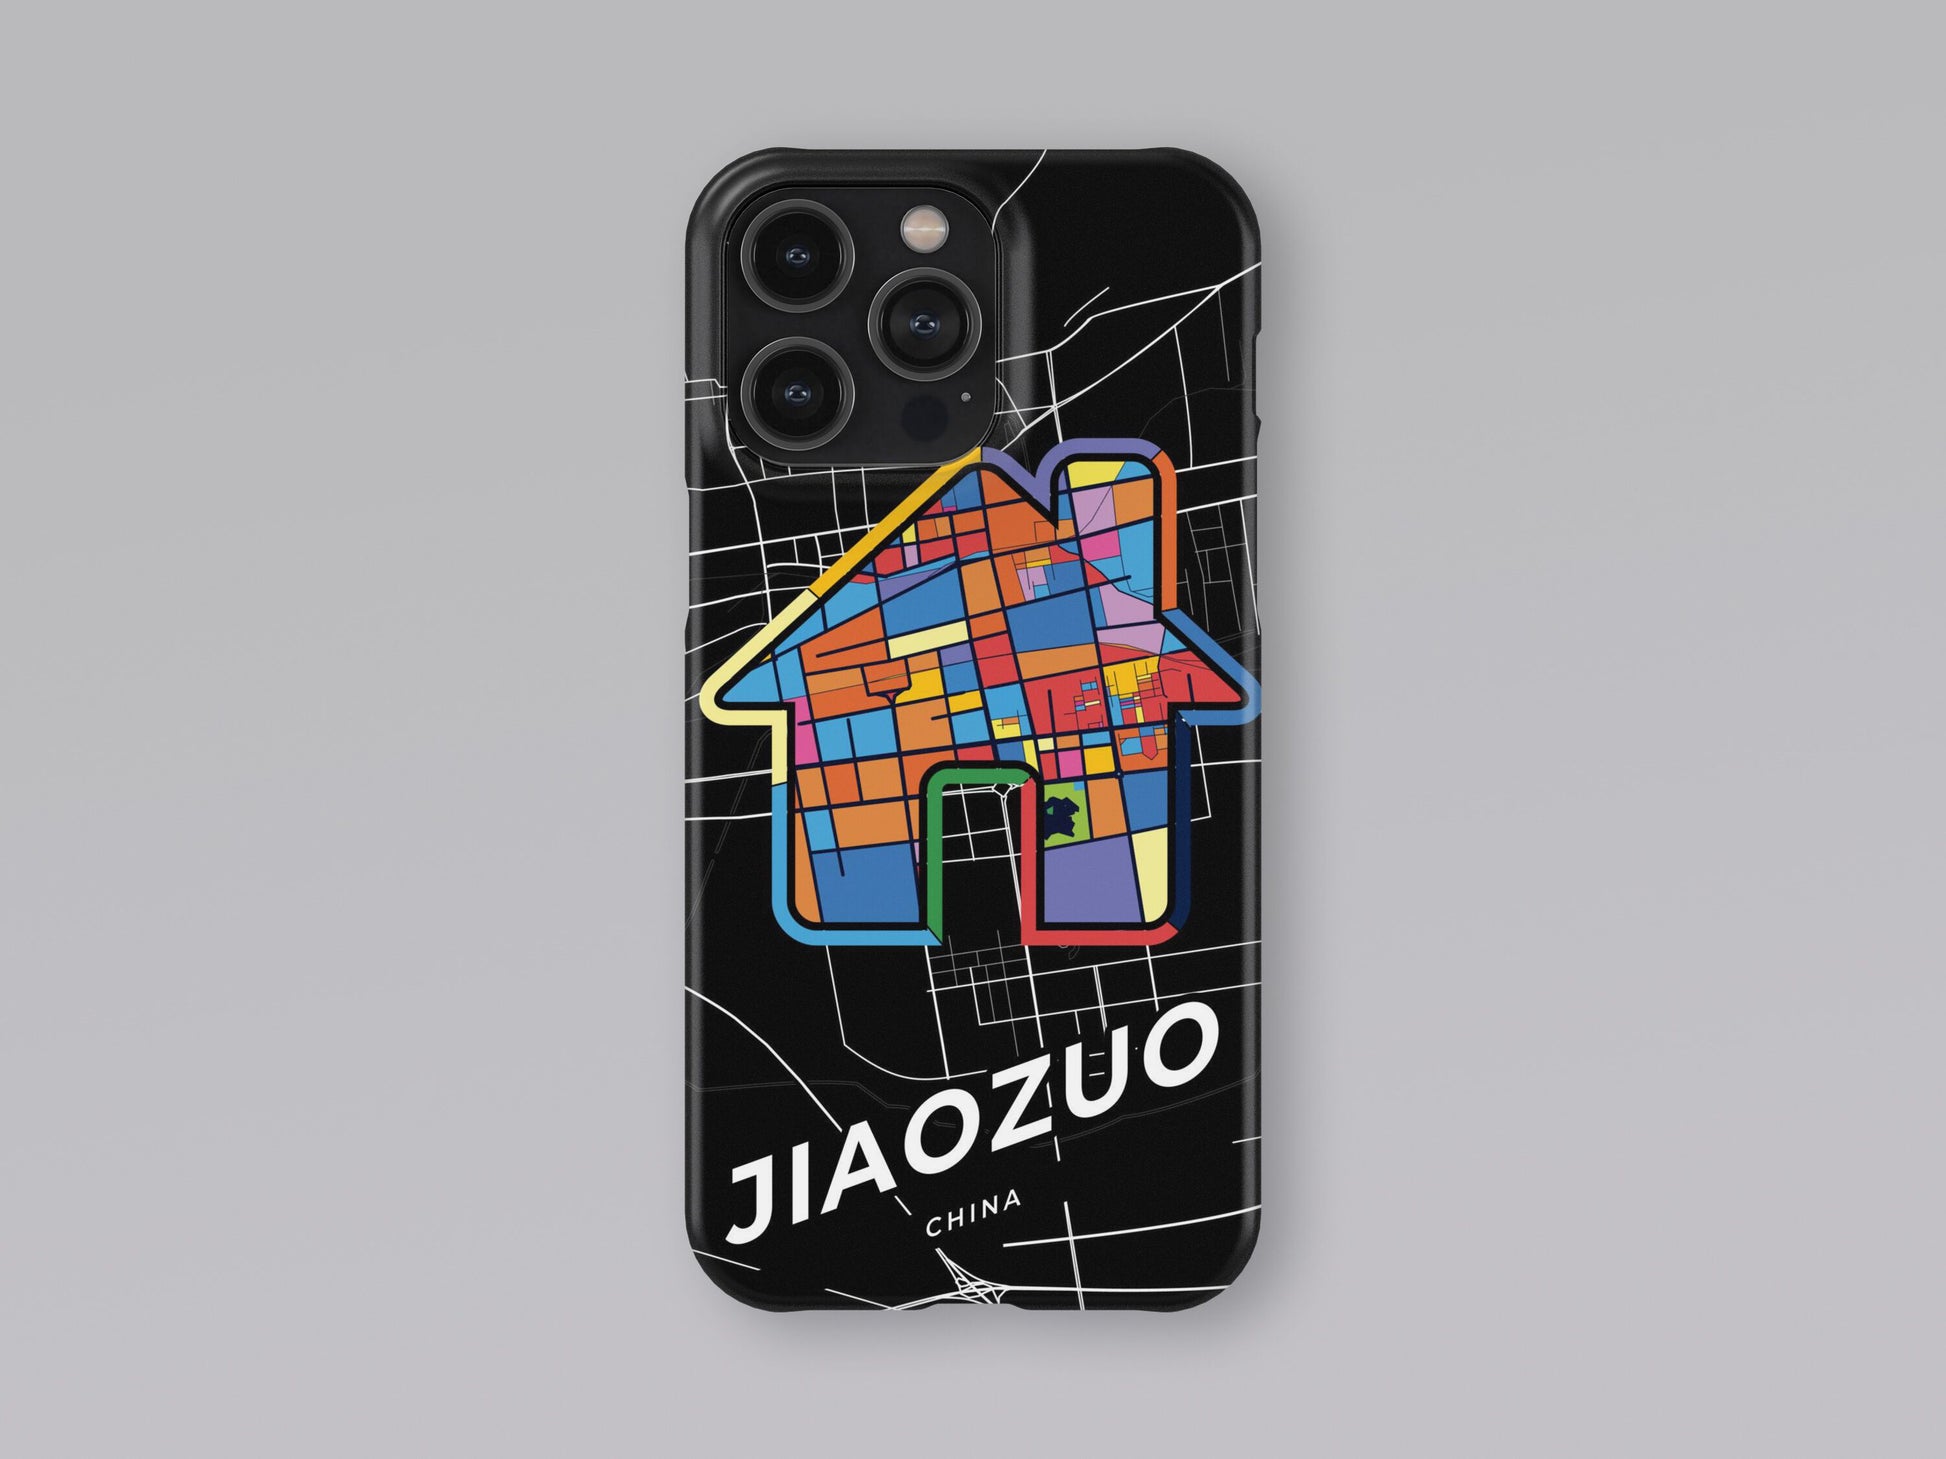 Jiaozuo China slim phone case with colorful icon. Birthday, wedding or housewarming gift. Couple match cases. 3